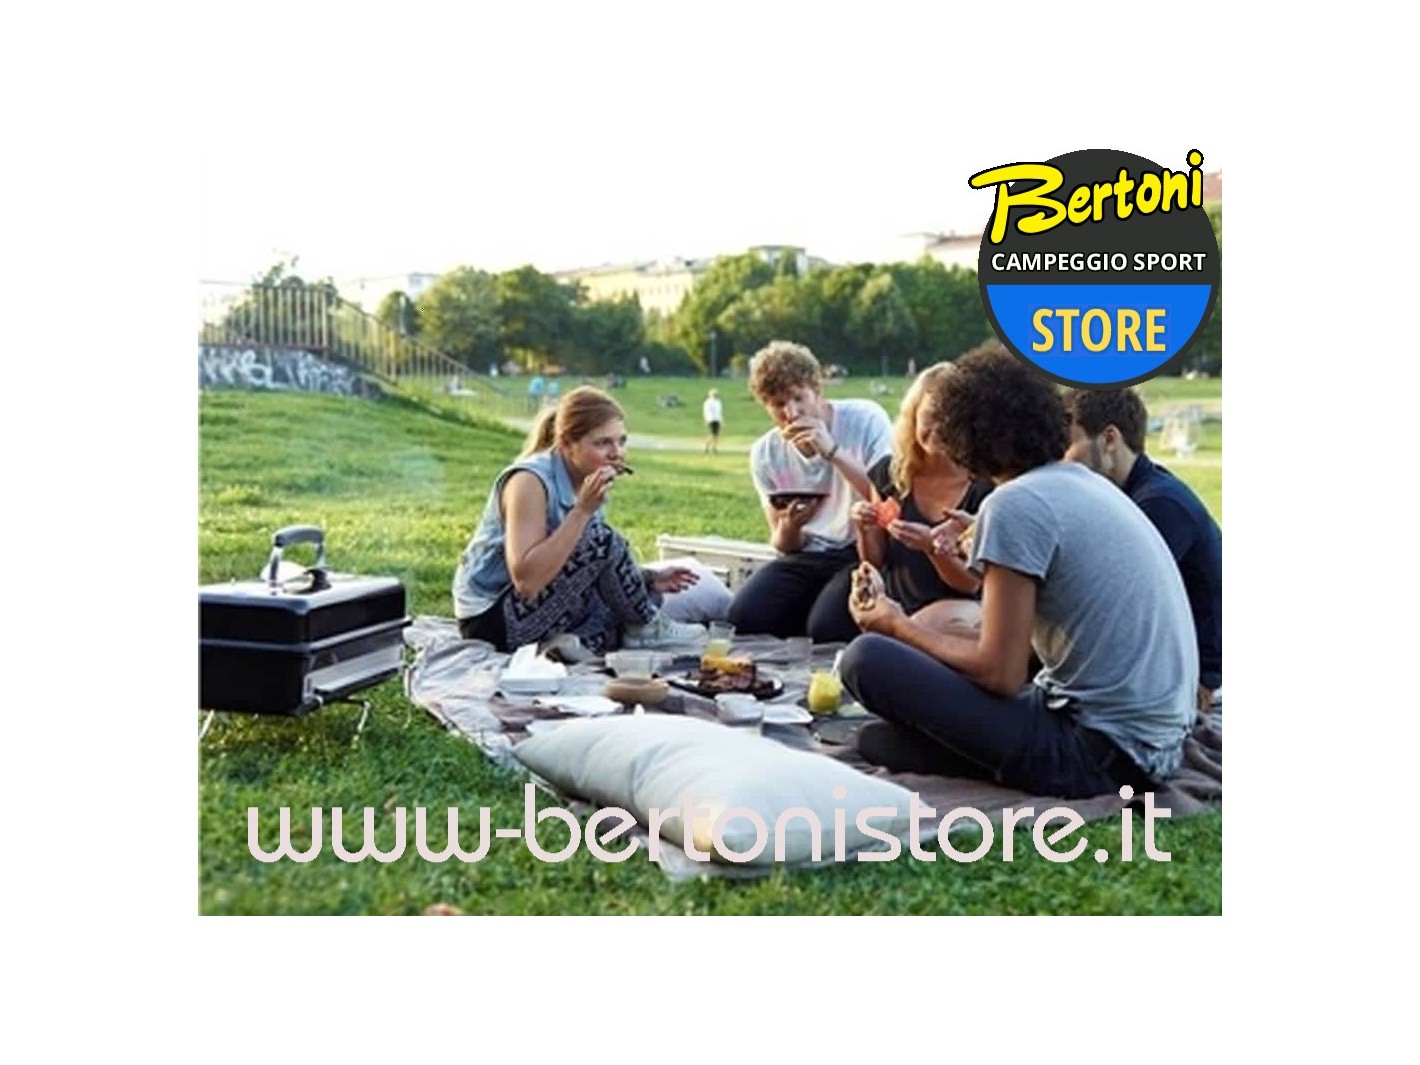 Barbecue a Carbonella Go-Anywhere 1131004 WEBER